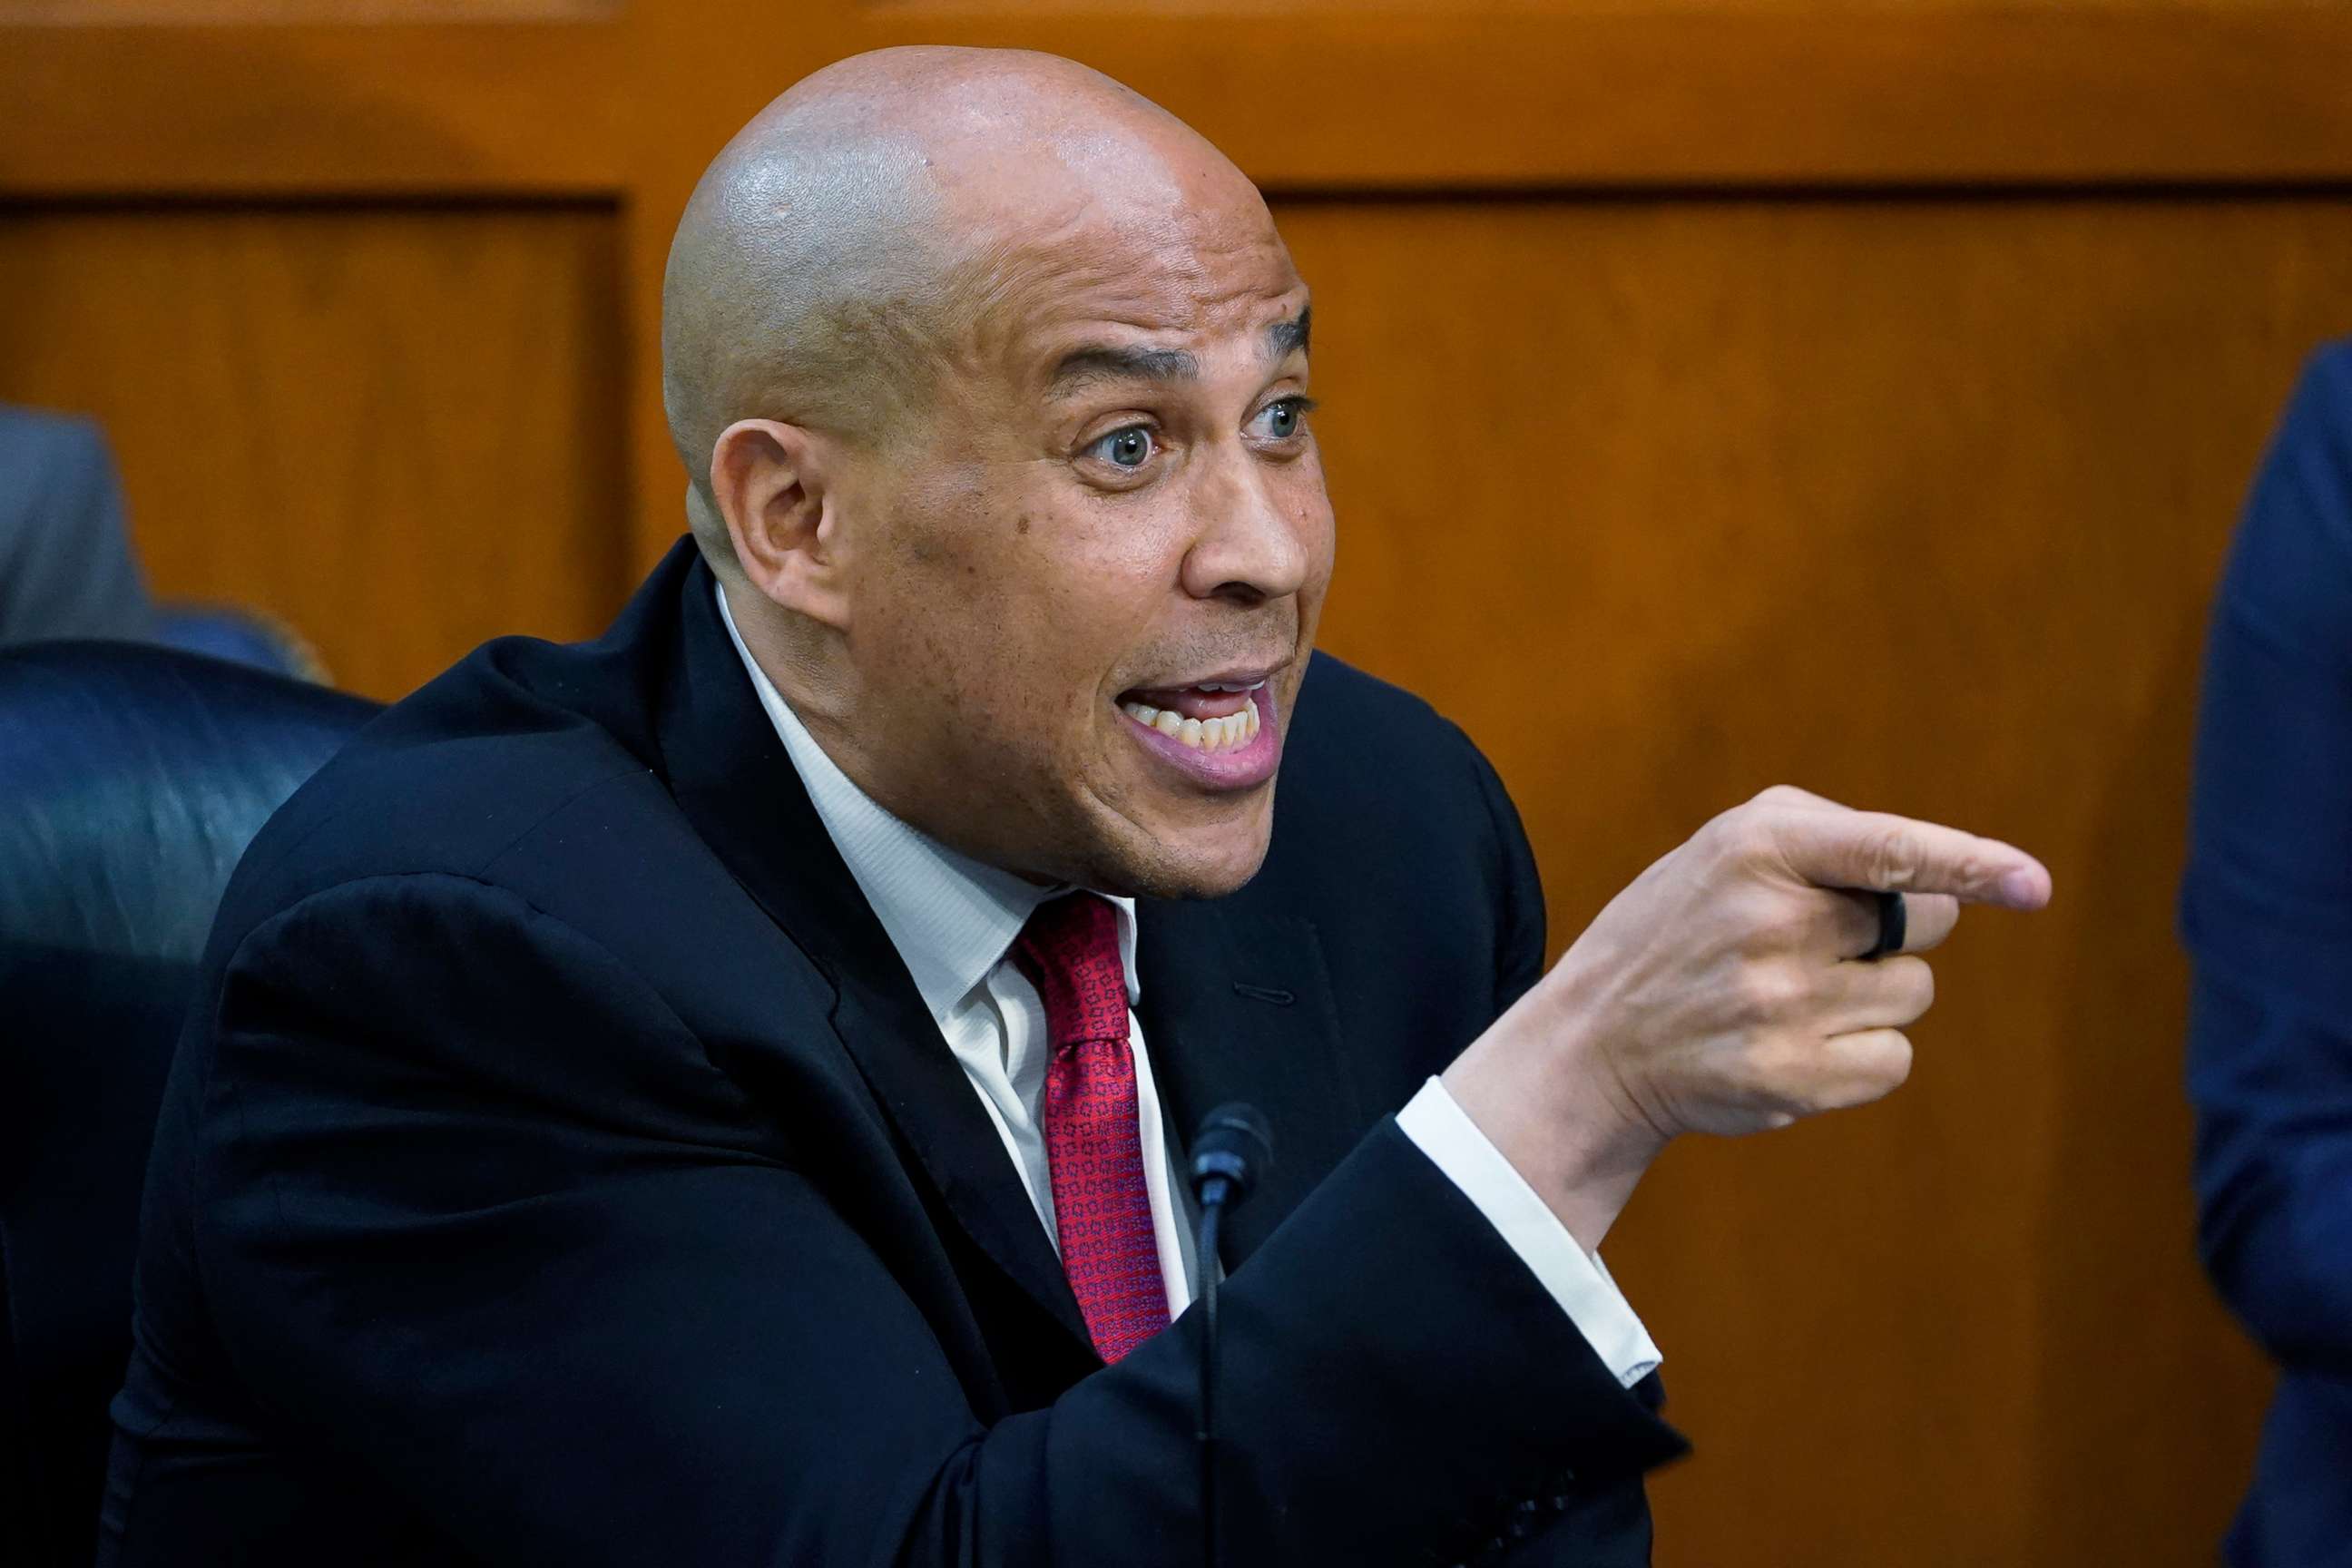 PHOTO: Sen. Cory Booker speaks during the confirmation hearing of Supreme Court nominee Judge Ketanji Brown Jackson before the Senate Judiciary Committee on Capitol Hill in Washington, March 23, 2022. 